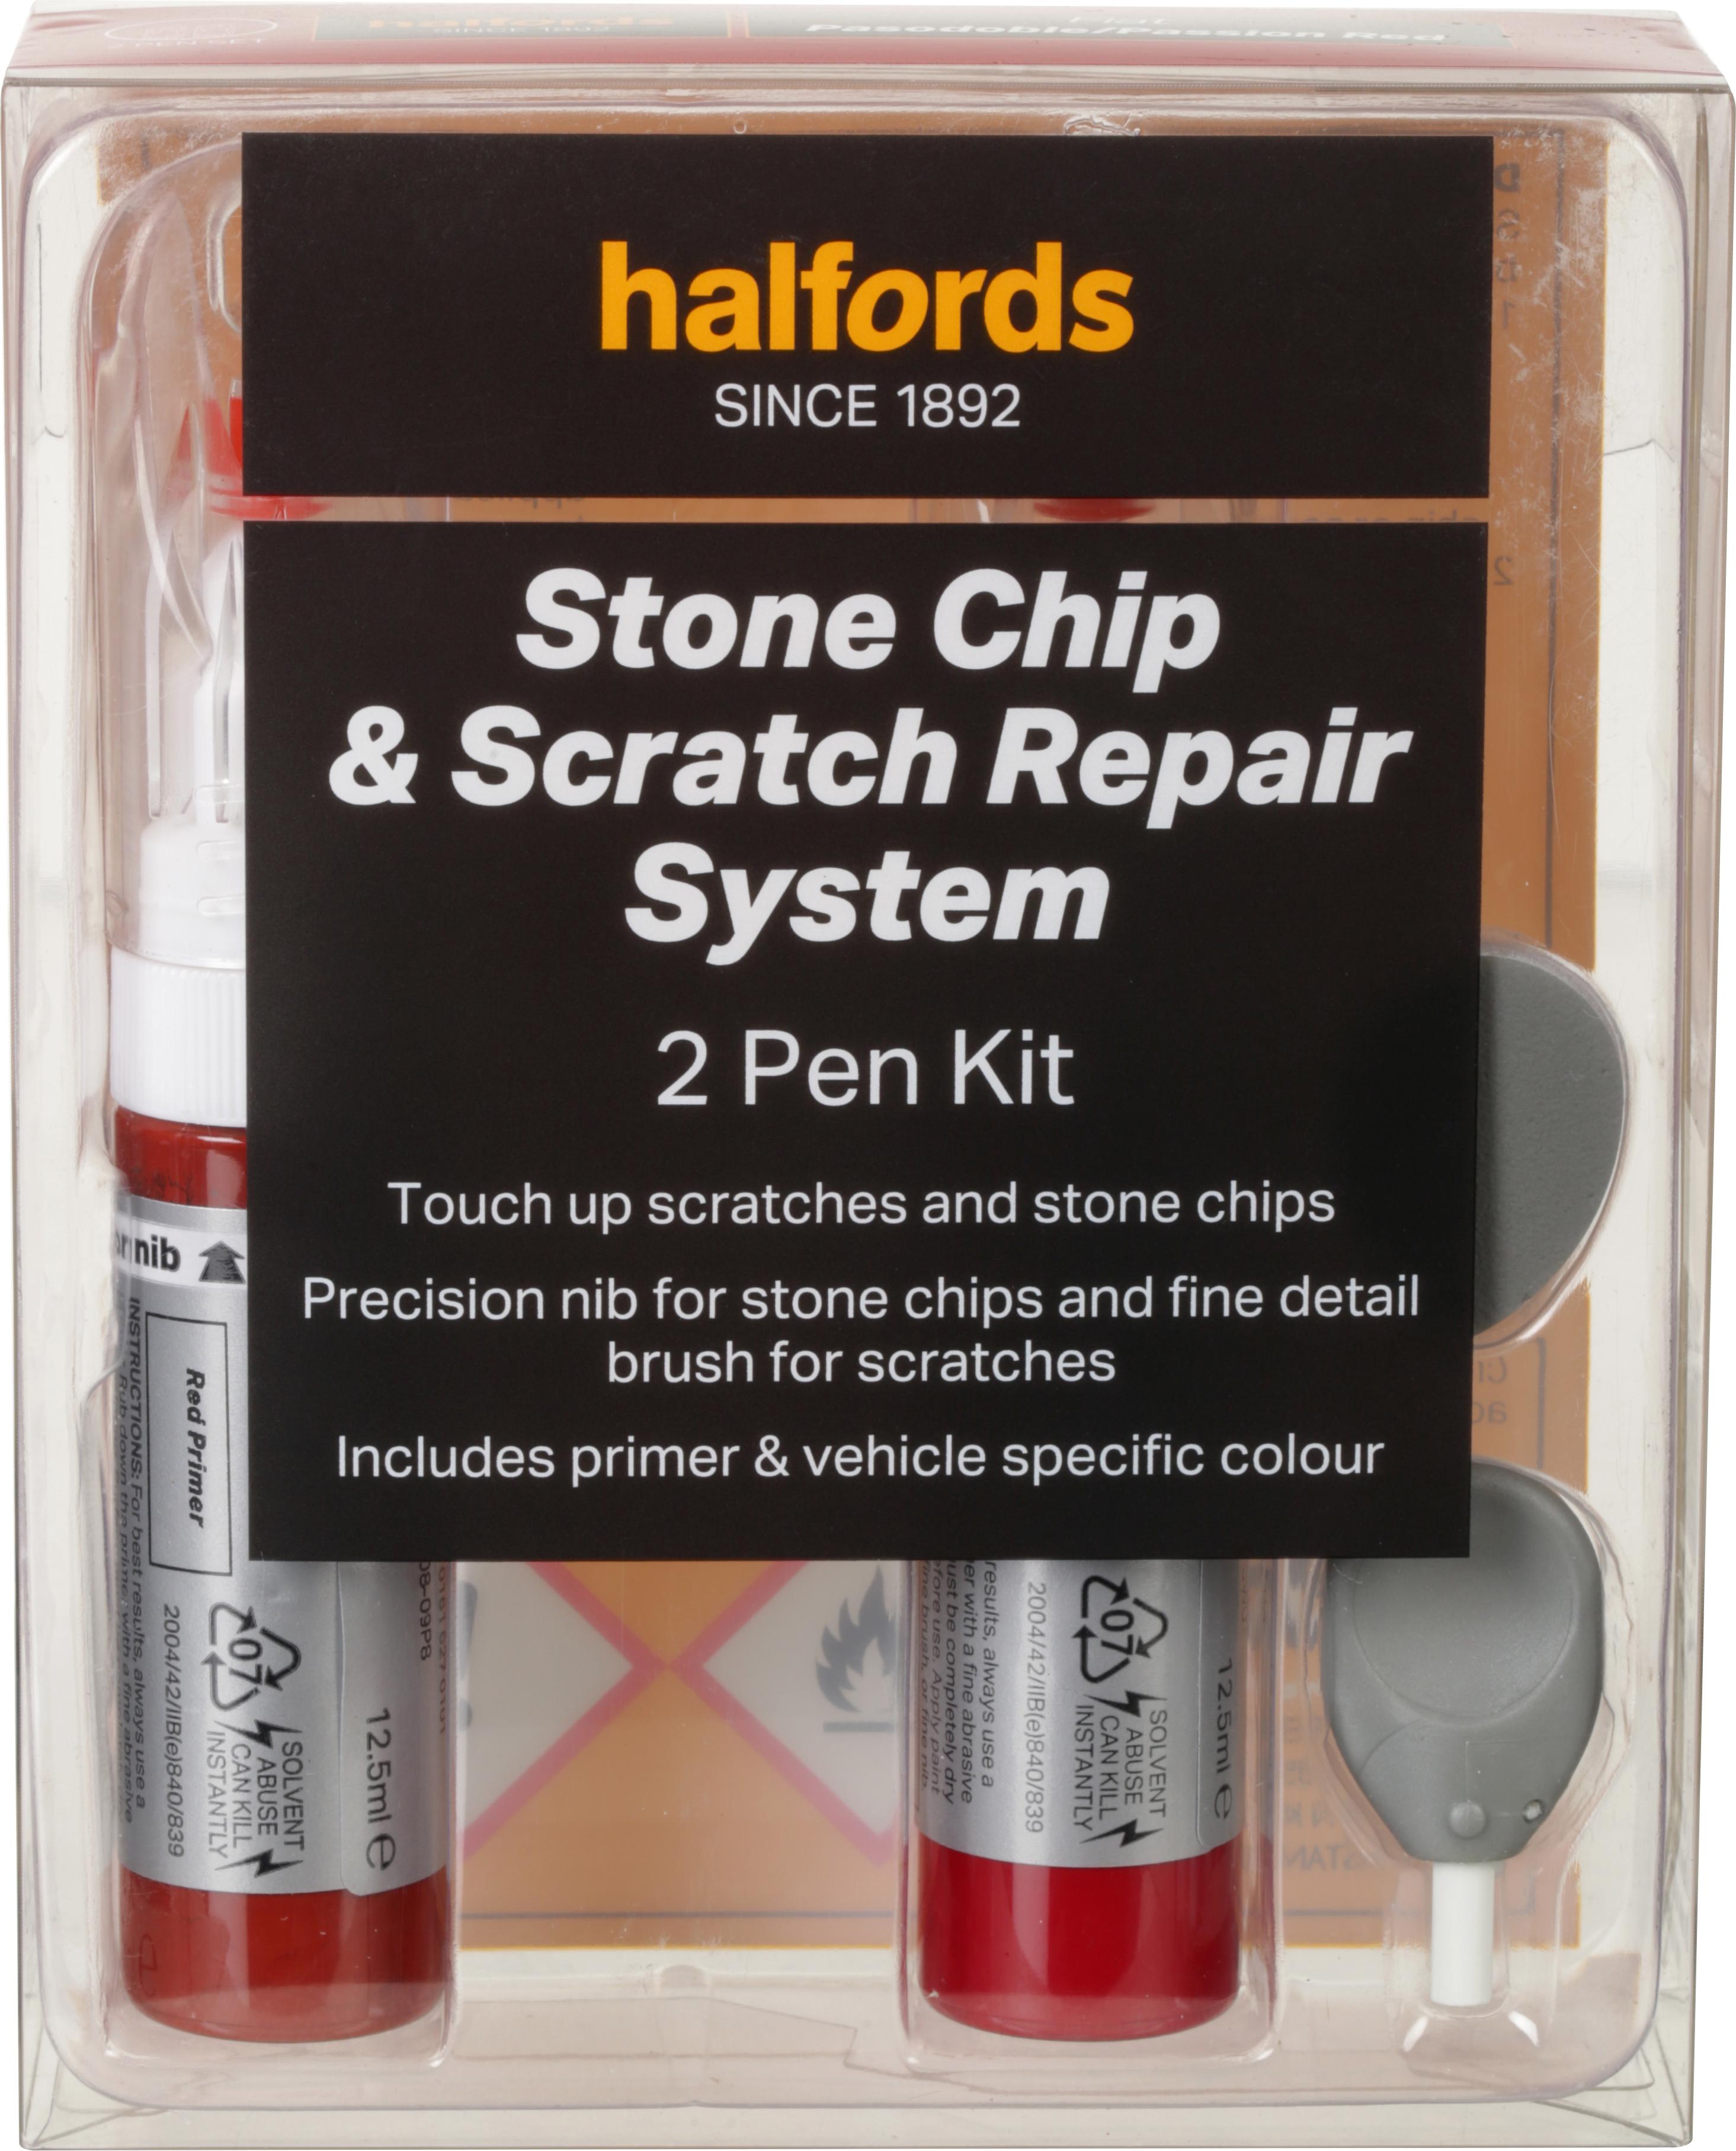 Halfords Fiat Pasodoble/Passion Red Scratch & Chip Repair Kit